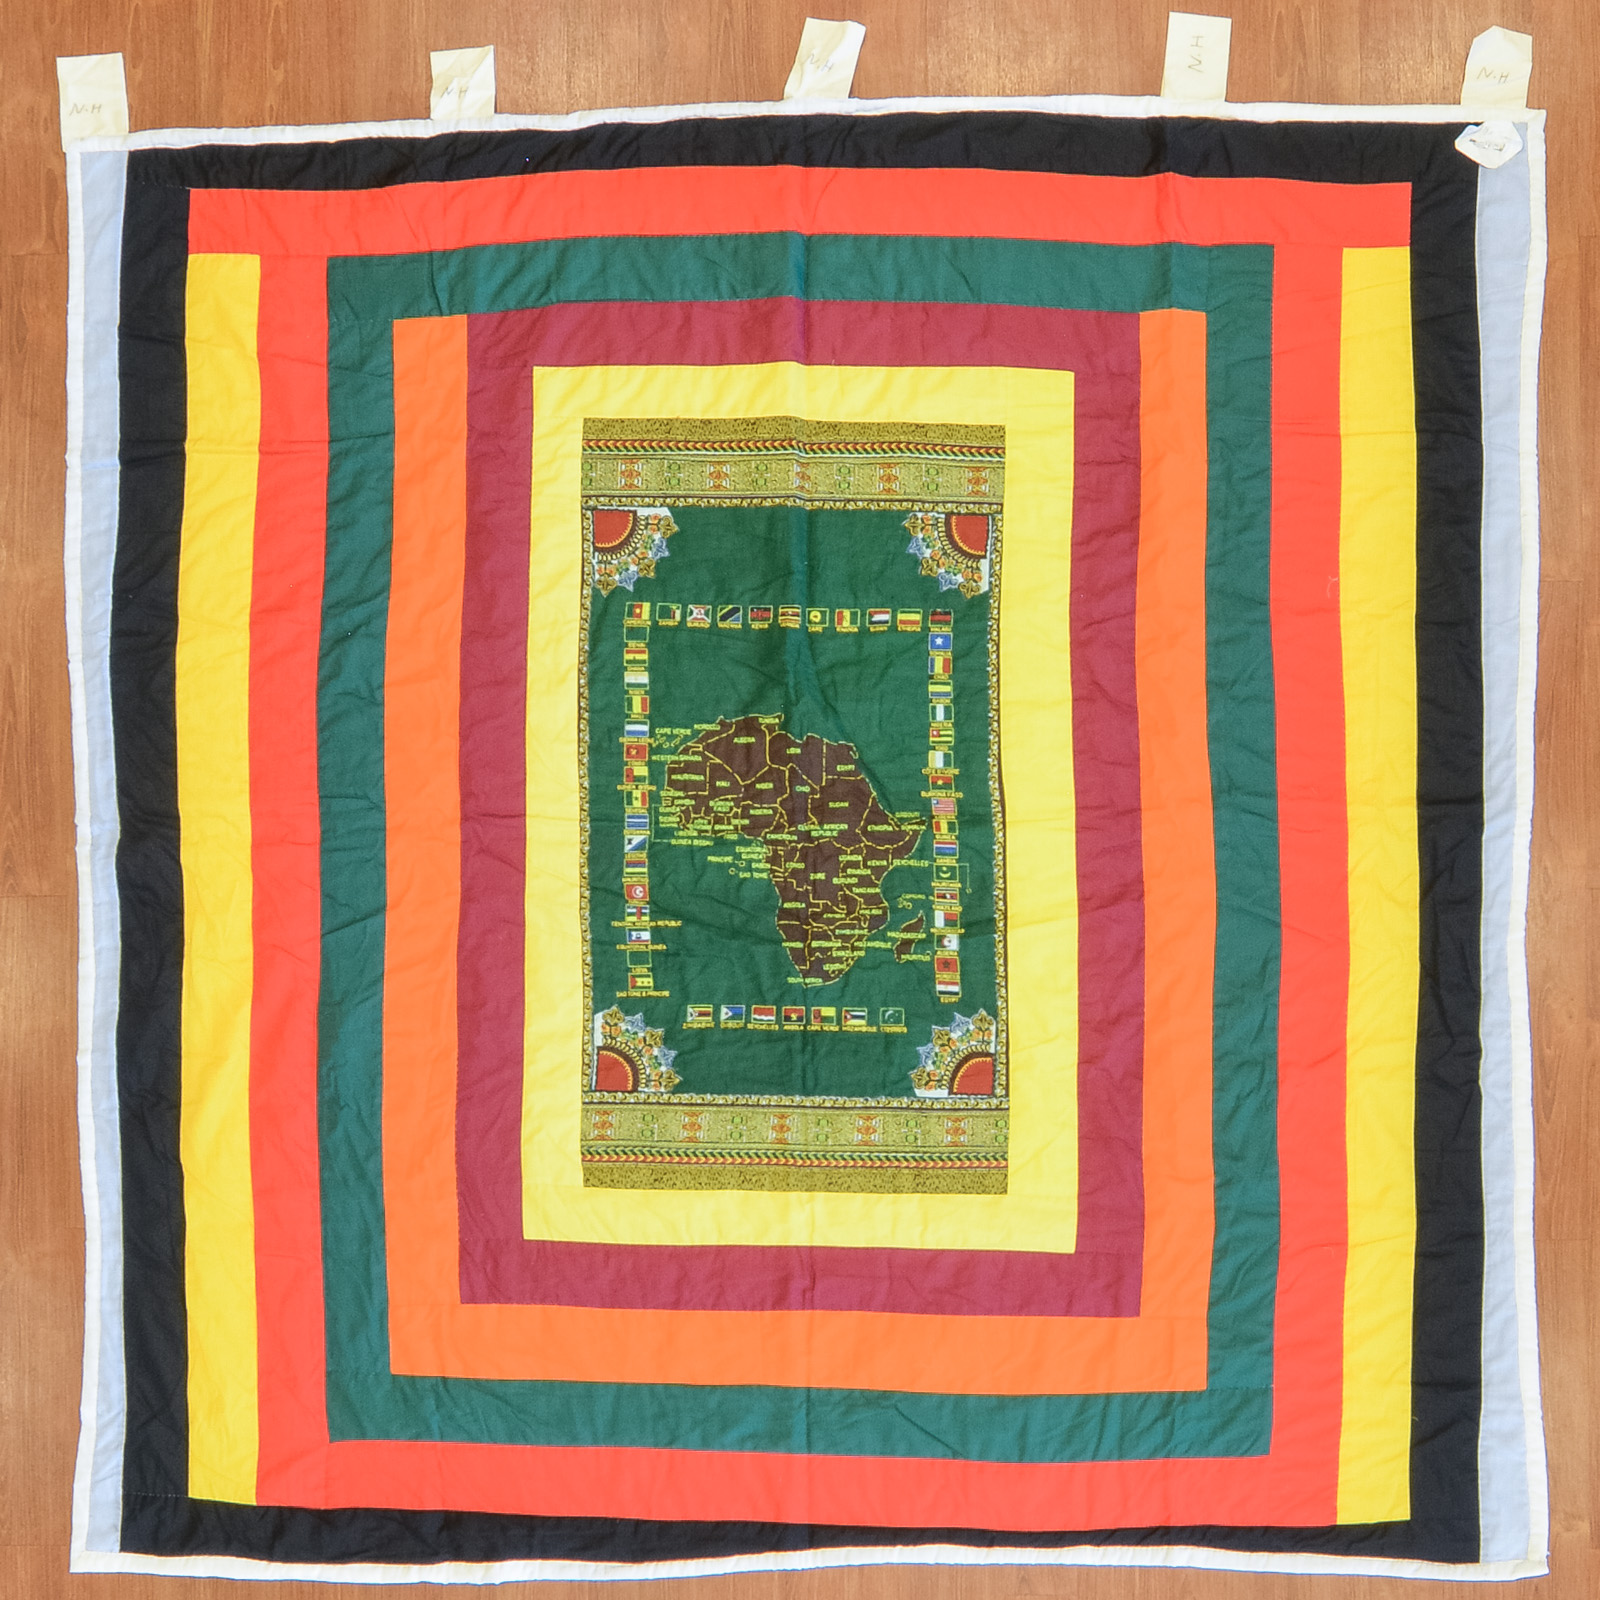 HAND-STITCHED "MAP OF AFRICA" QUILT